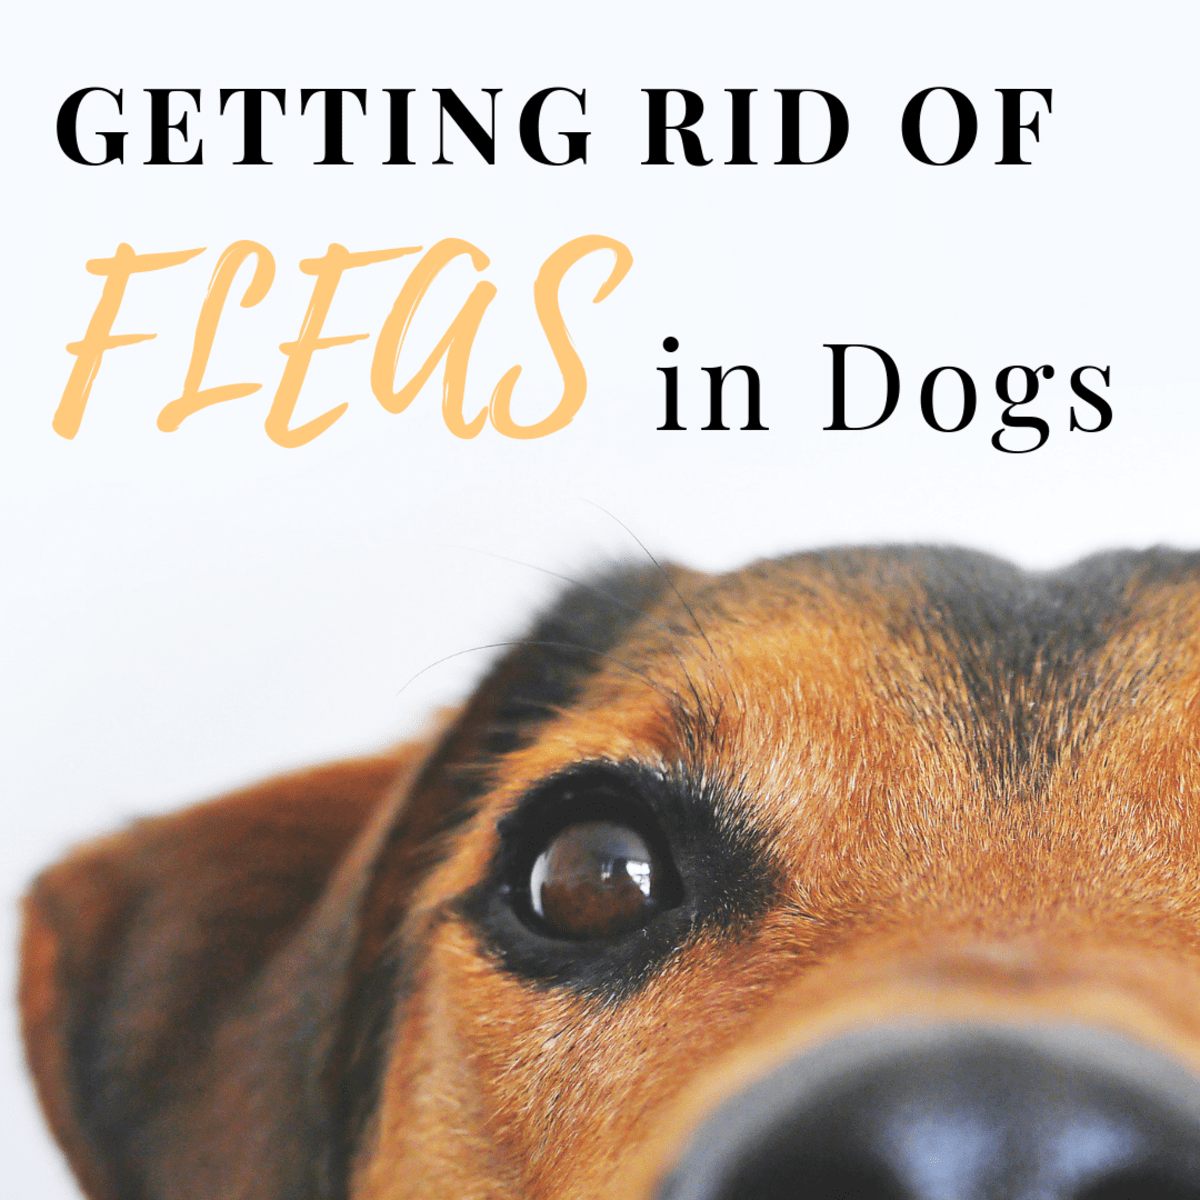 what is the safest flea treatment for puppies